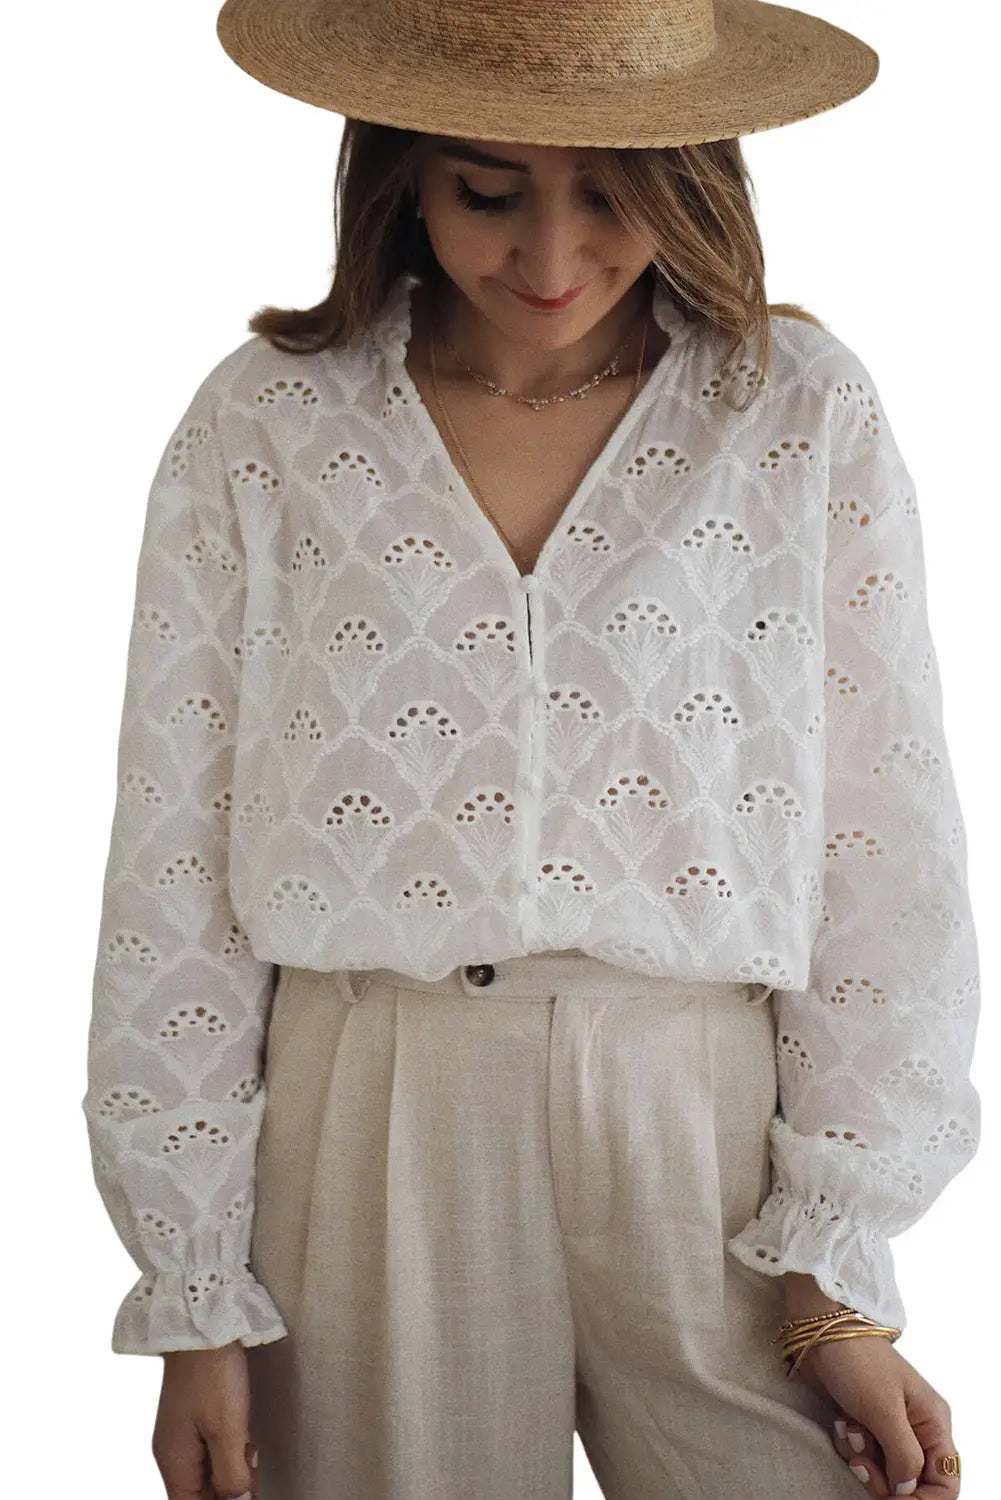 White fanshaped lace hollow out split neck puff sleeve blouse - tops